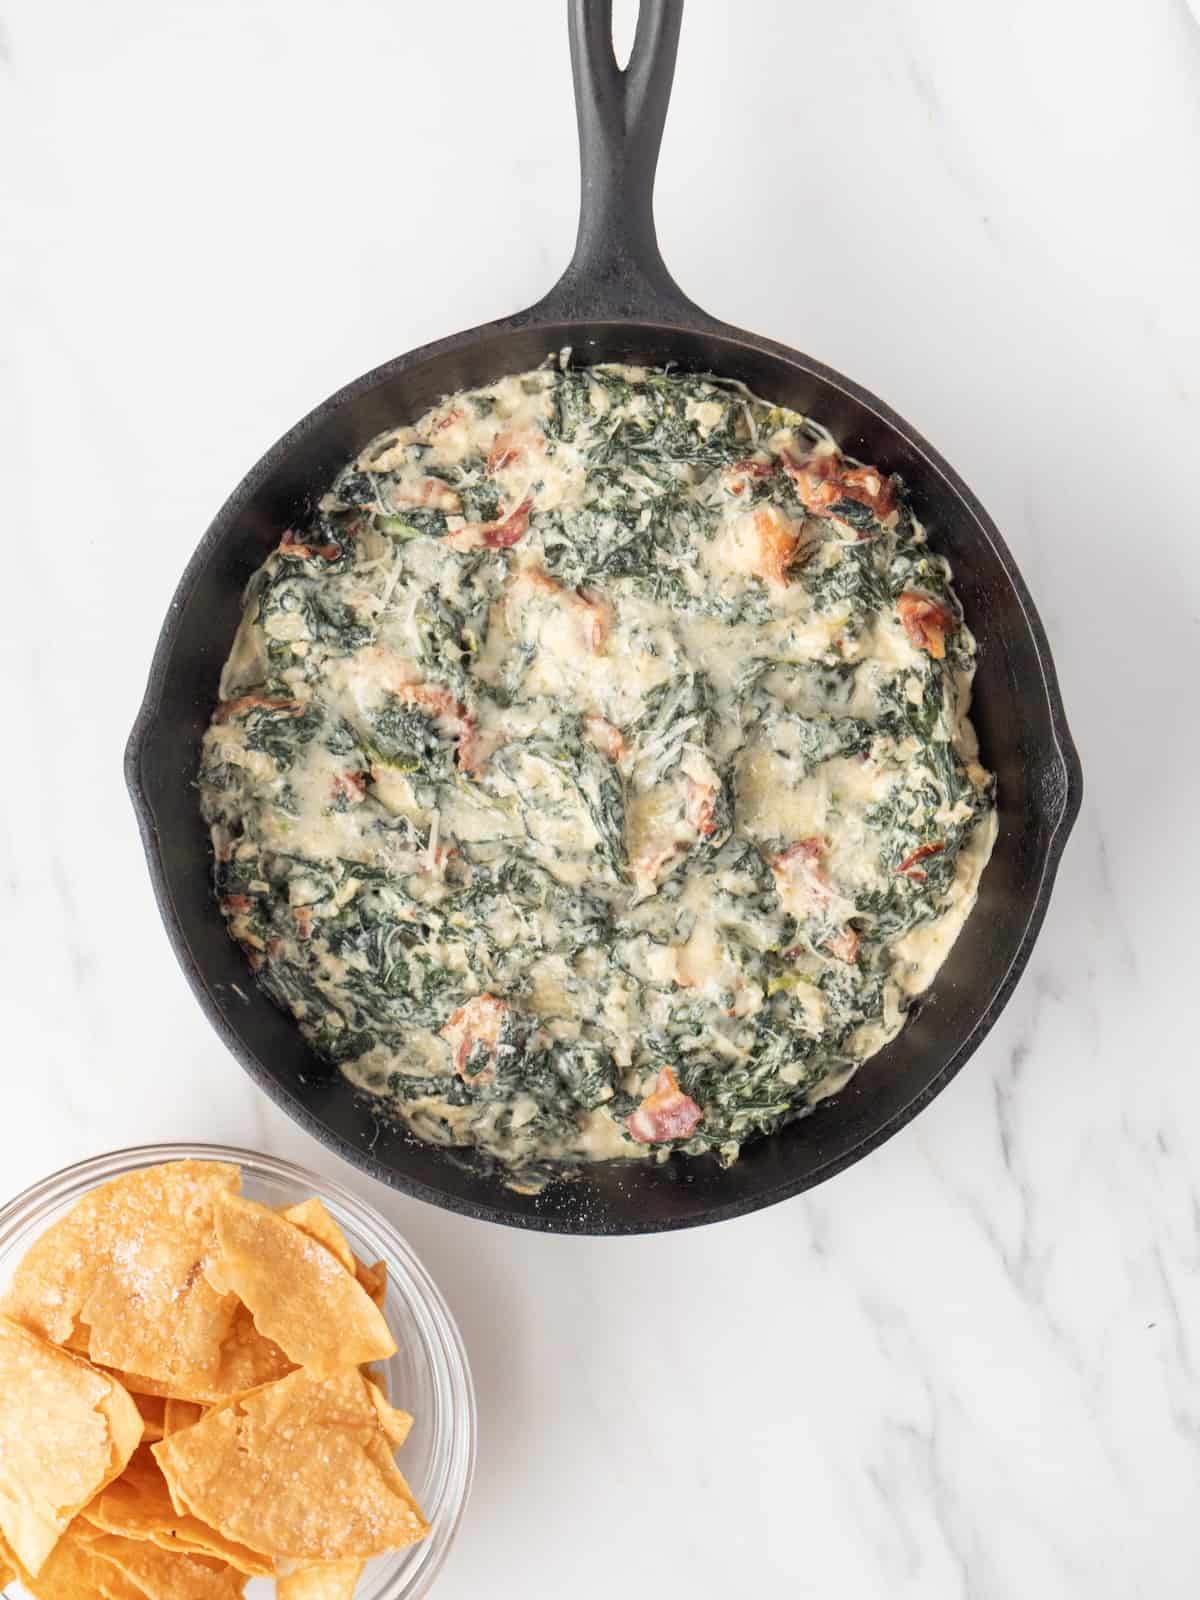 A skillet with hot kale and bacon dip topped with parmesan cheese melted in the oven.